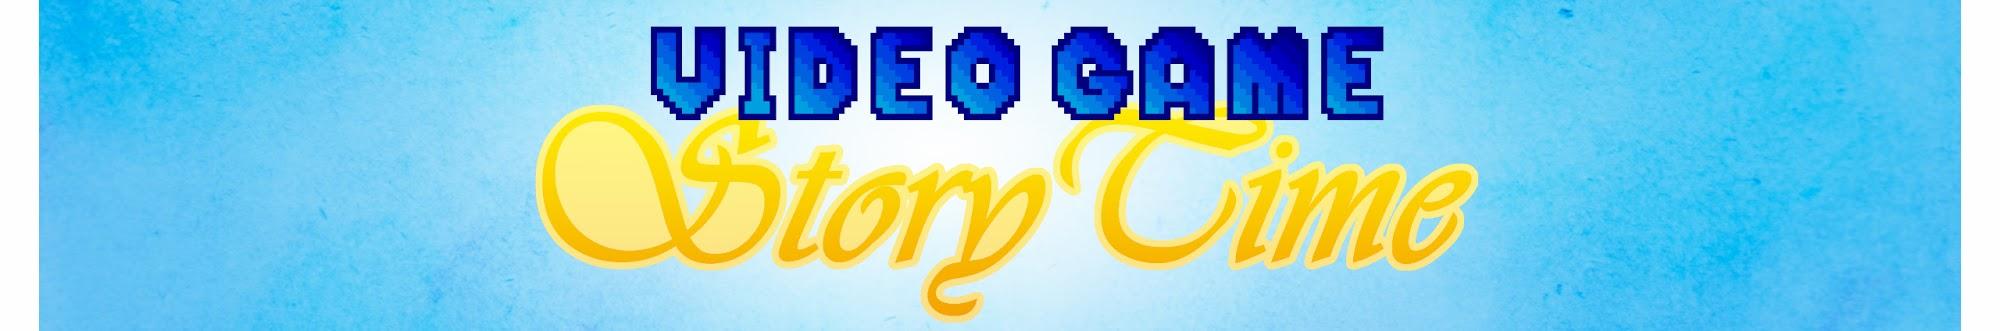 Video Game Story Time